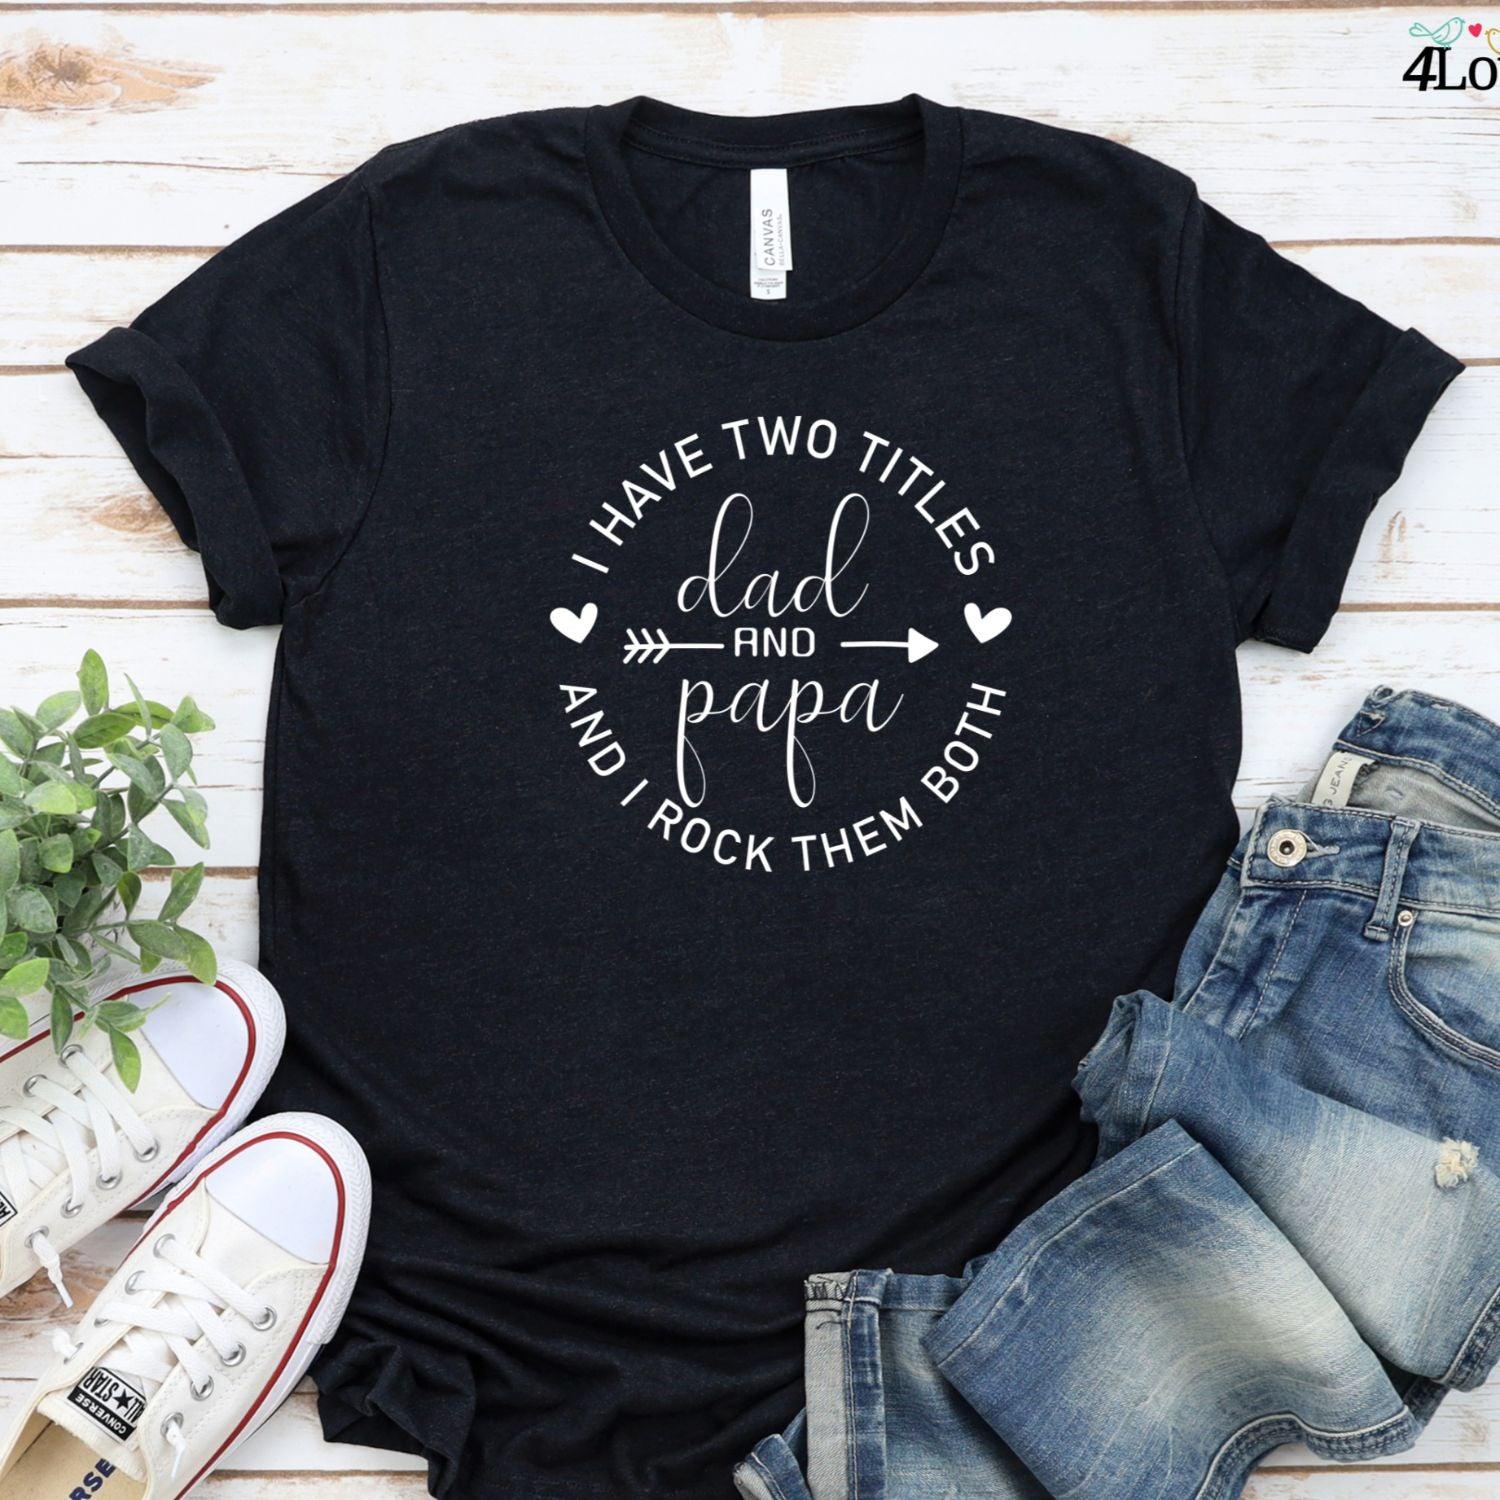 Matching Set for Mom & Mimi, Dad & Papa: Grandparent Gifts - Celebrate with Family - 4Lovebirds